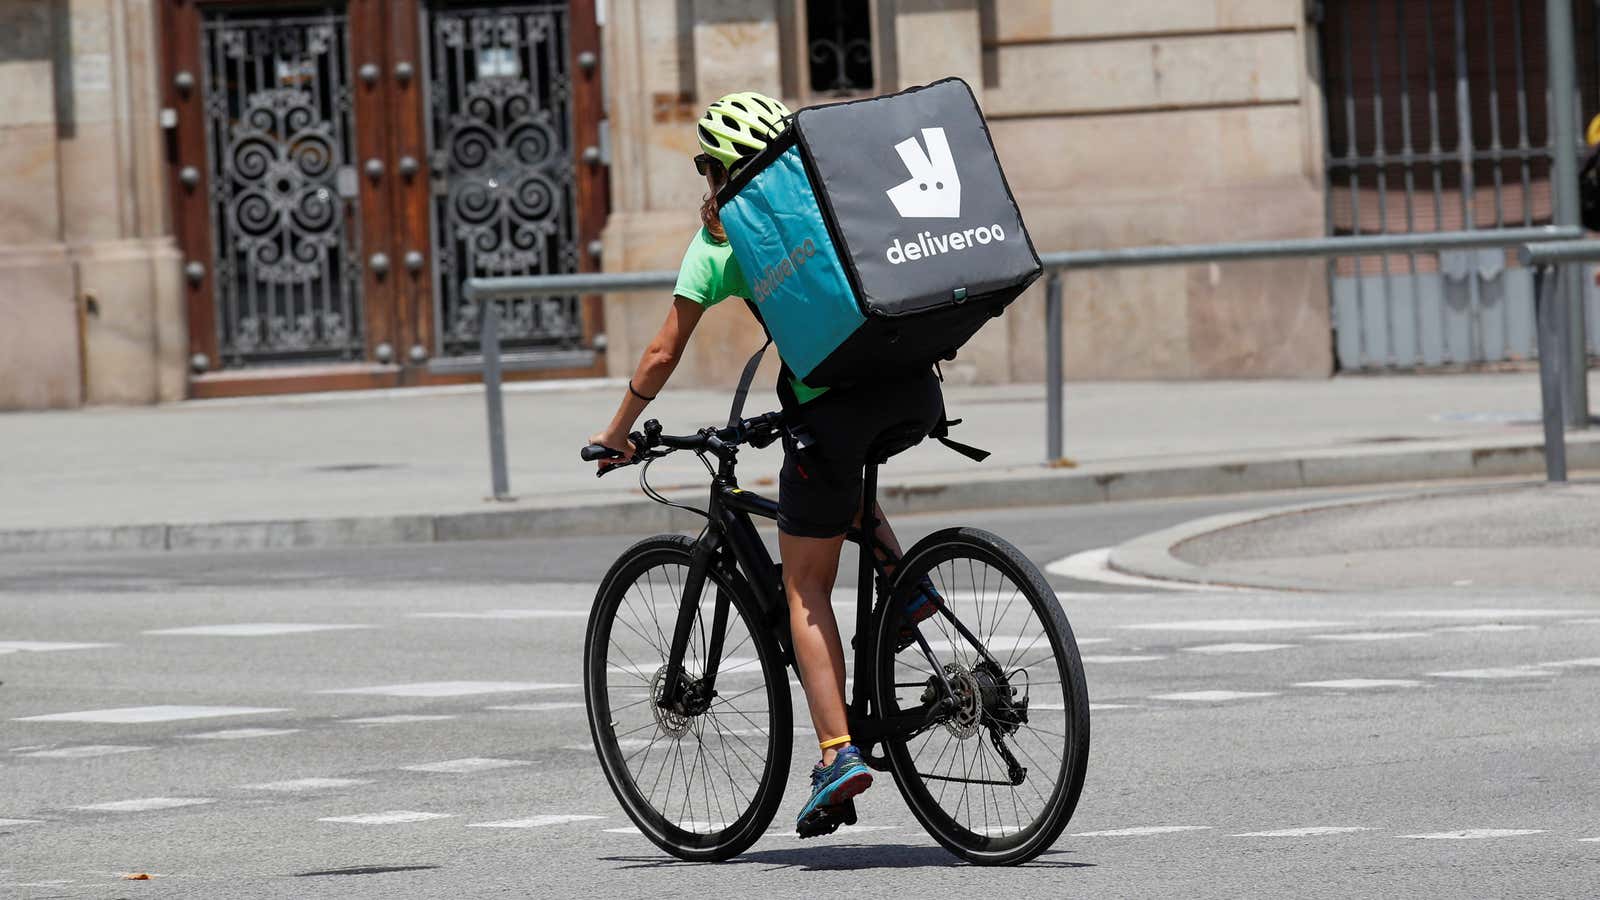 More than 1,000 Deliveroo riders are out of work in Germany.